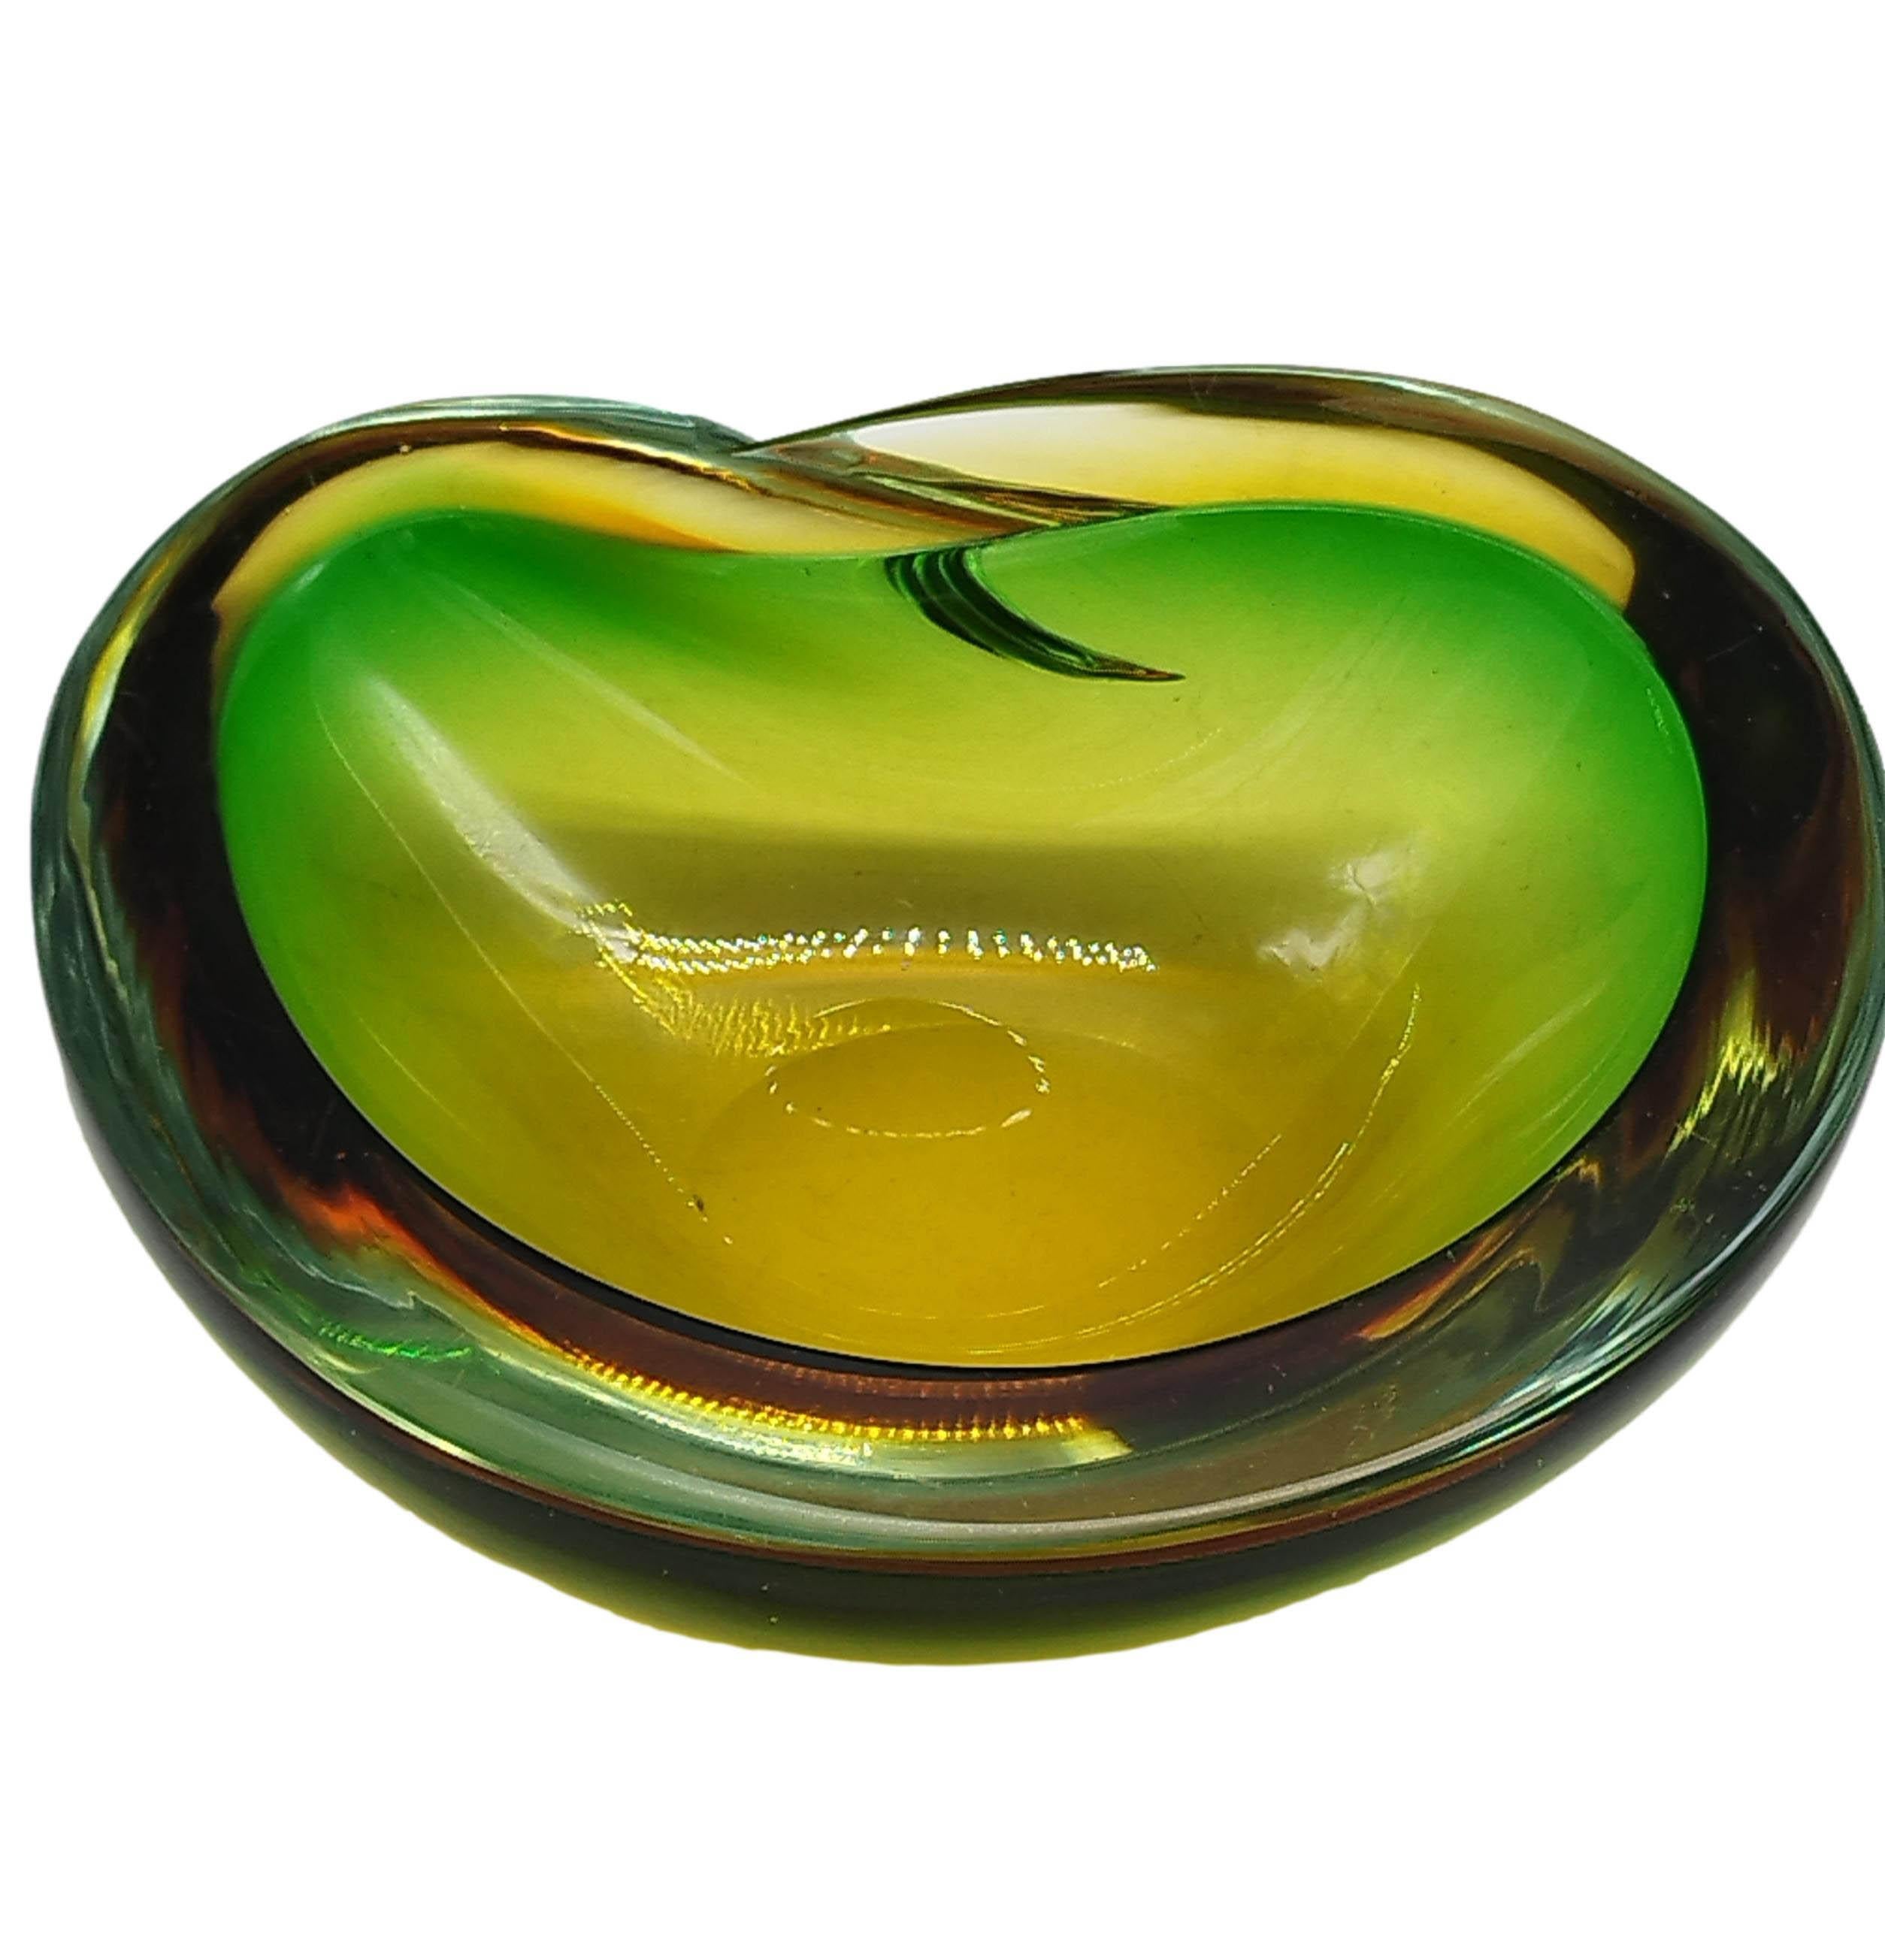 Yellow, amber and green coloured Murano glass centrepiece in Flavio Poli's Sommerso style. The work is in the typical ear shape often found in Murano bowls of the period. The object is not signed, like most pieces of that period, but shows great